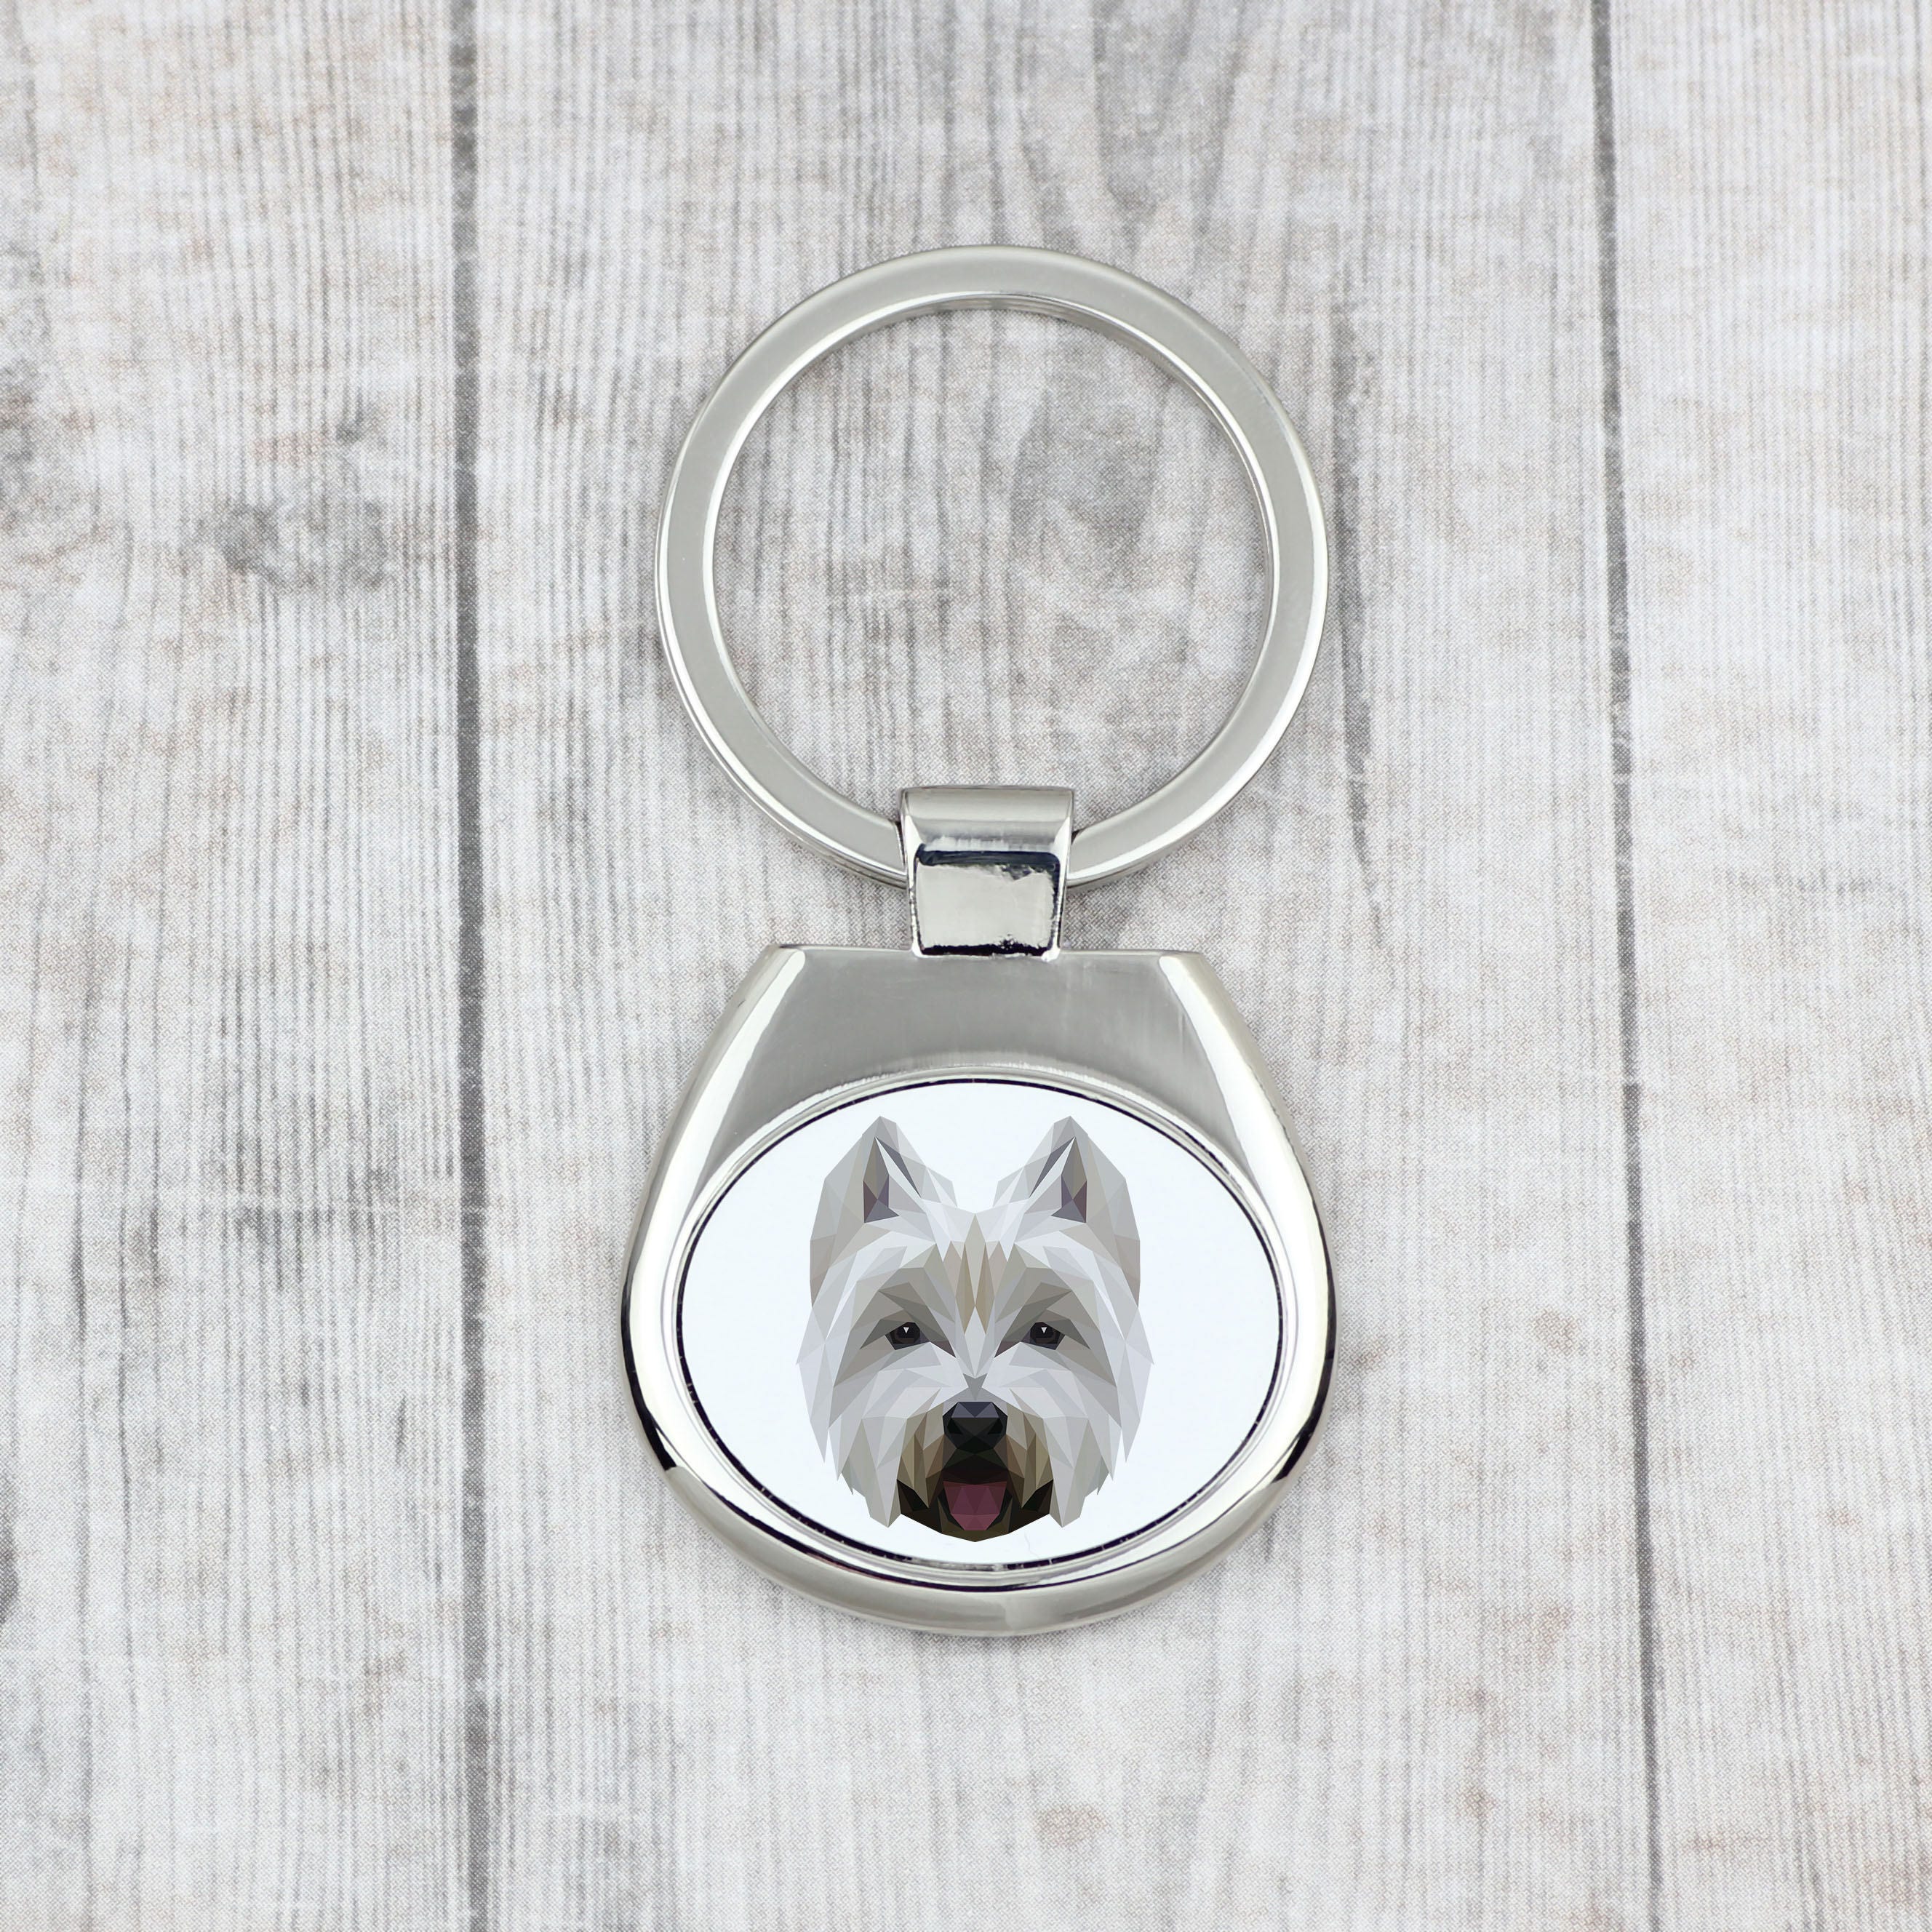 Sublimation Art Dog Ltd New keyrings with Purebred Dogs Unique Gift West Highland White Terrier